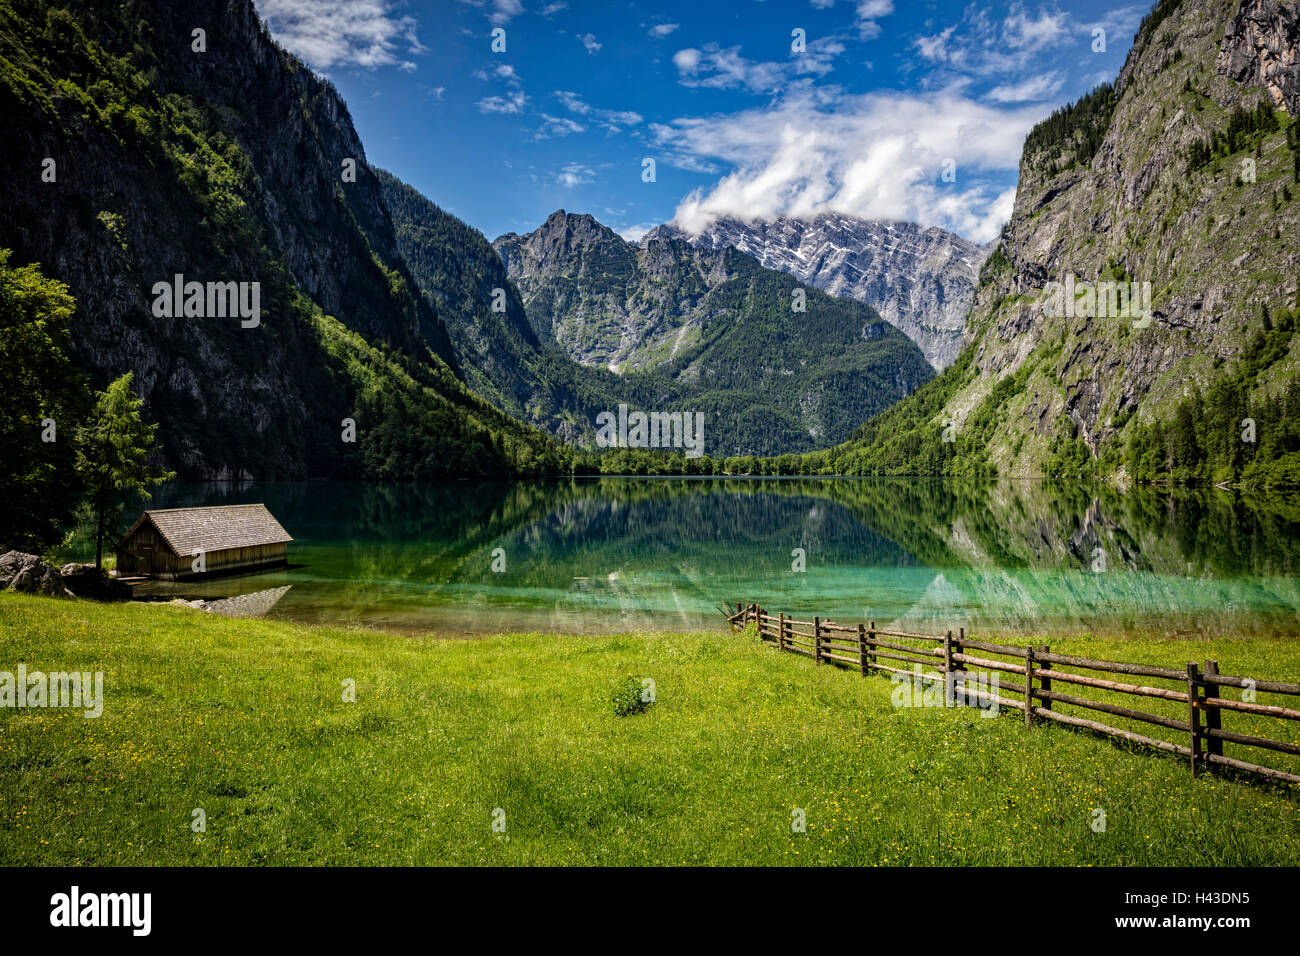 View from Fischunkenalm to Obersee and the Watzmann massif, Berchtesgaden District, Berchtesgaden, Bavaria, Germany Stock Photo